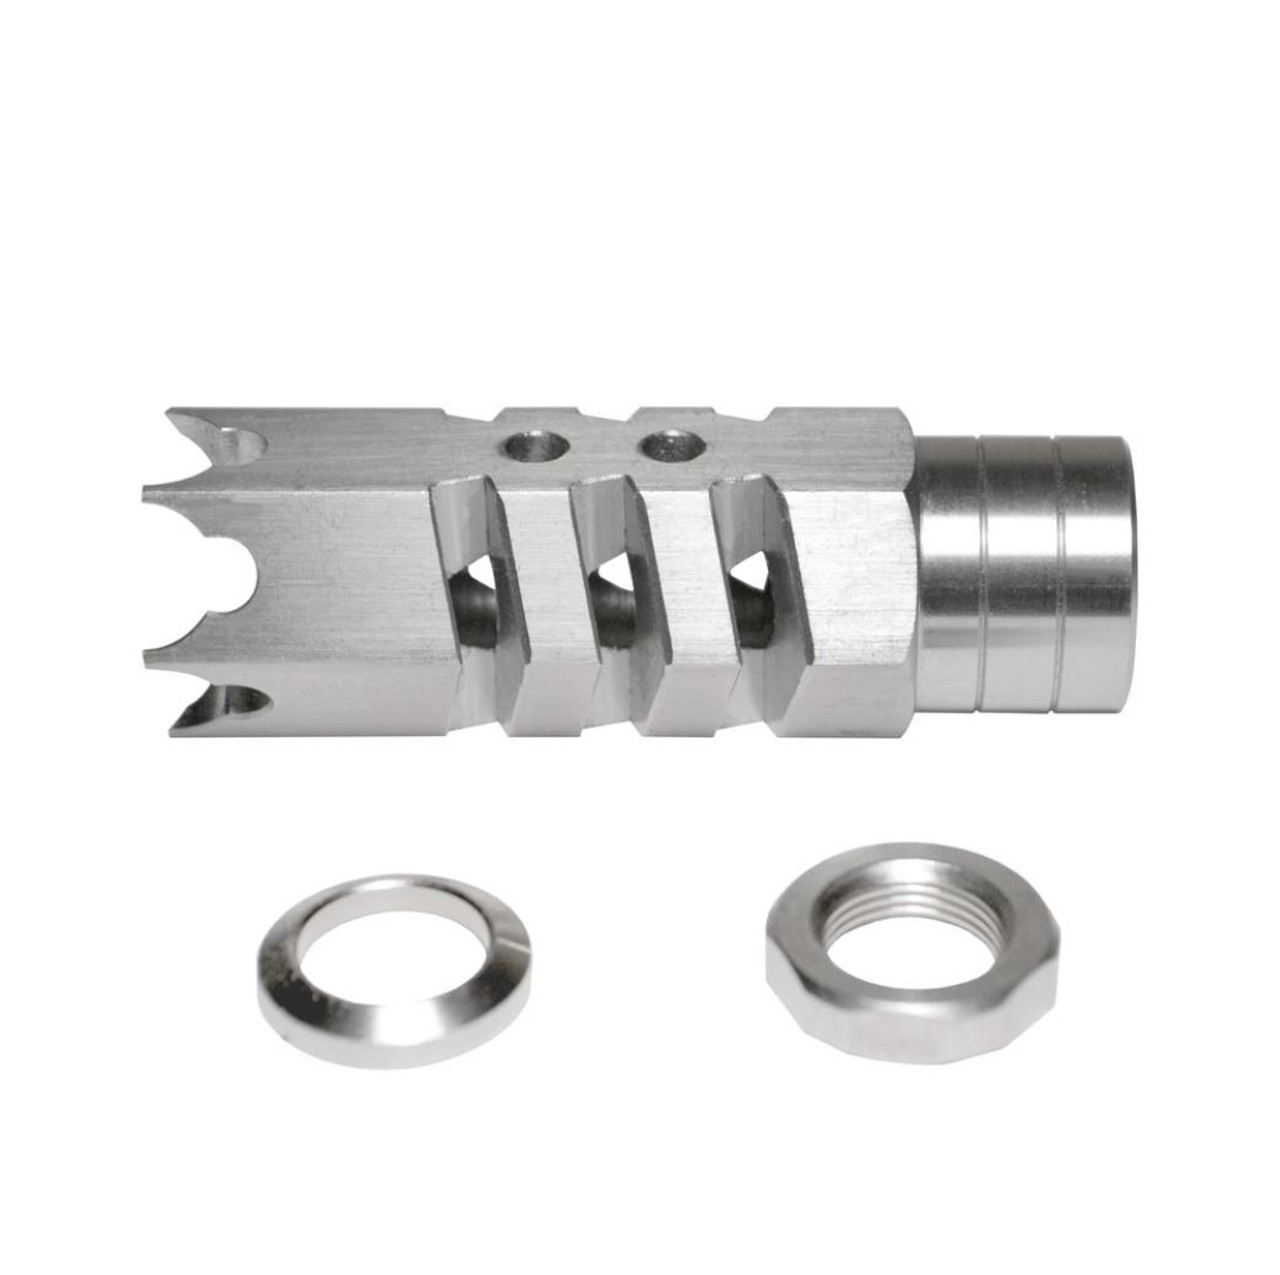 MCS Tactical Competition Grade Muzzle Brake, 1/2x28 Stainless Steel - AR-15 